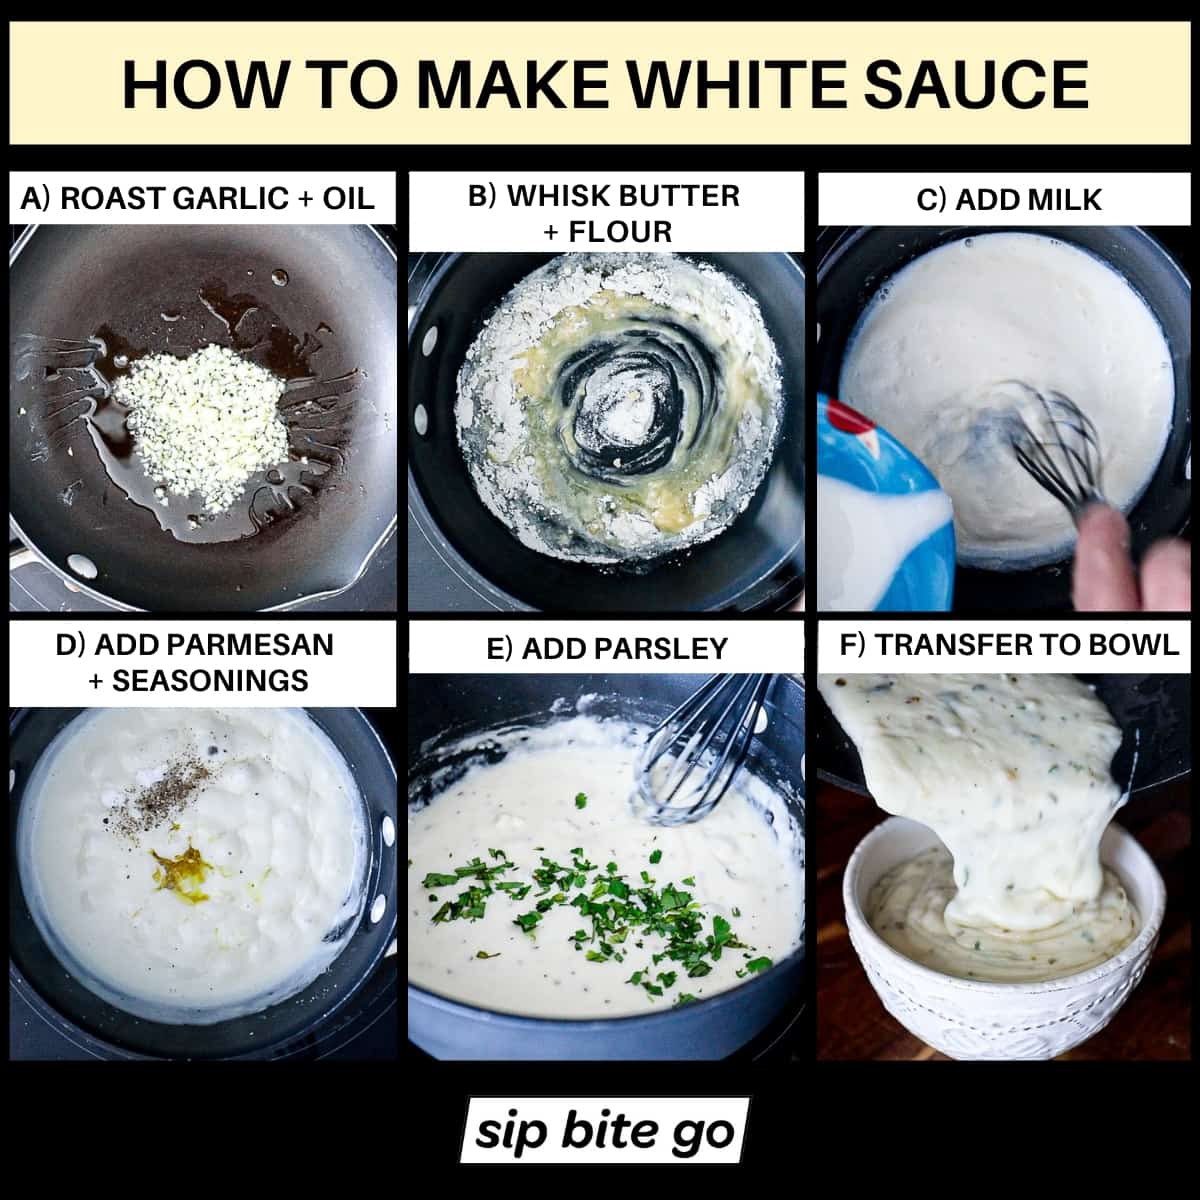 Illustrated steps for making white pizza sauce recipe with garlic and parmesan cheese with captions.